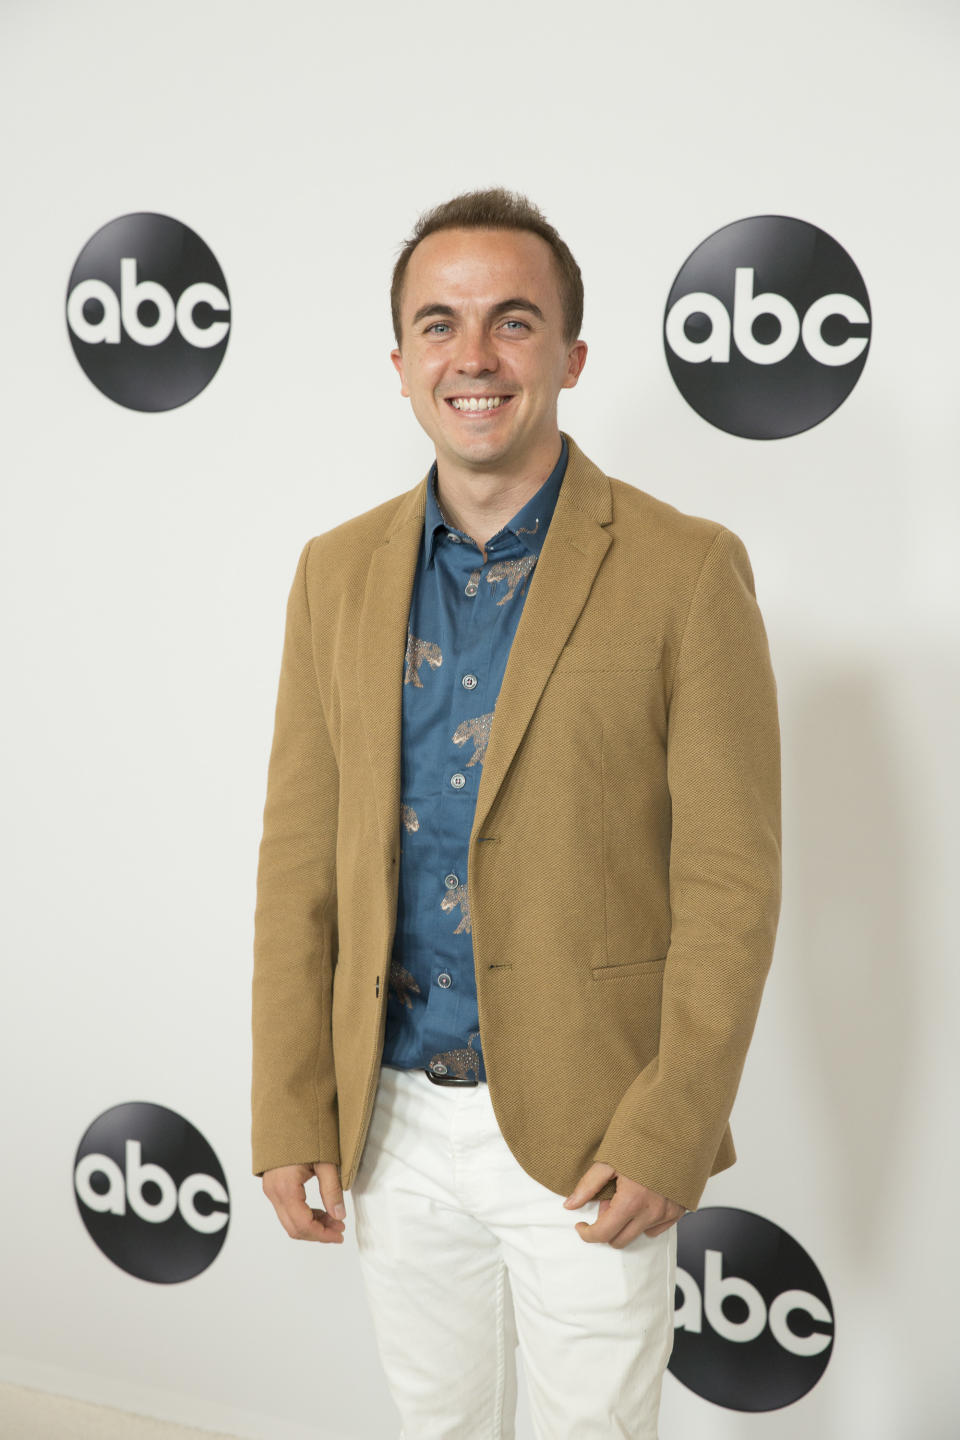 TCA SUMMER PRESS TOUR 2018 - Talent, executives and showrunners from Walt Disney Television via Getty Images arrived to The Beverly Hilton in Beverly Hills for the Disney | Walt Disney Television via Getty Images Television All-Star Cocktail Reception and Interview Opportunity. (Image Group LA via Getty Images)
FRANKIE MUNIZ